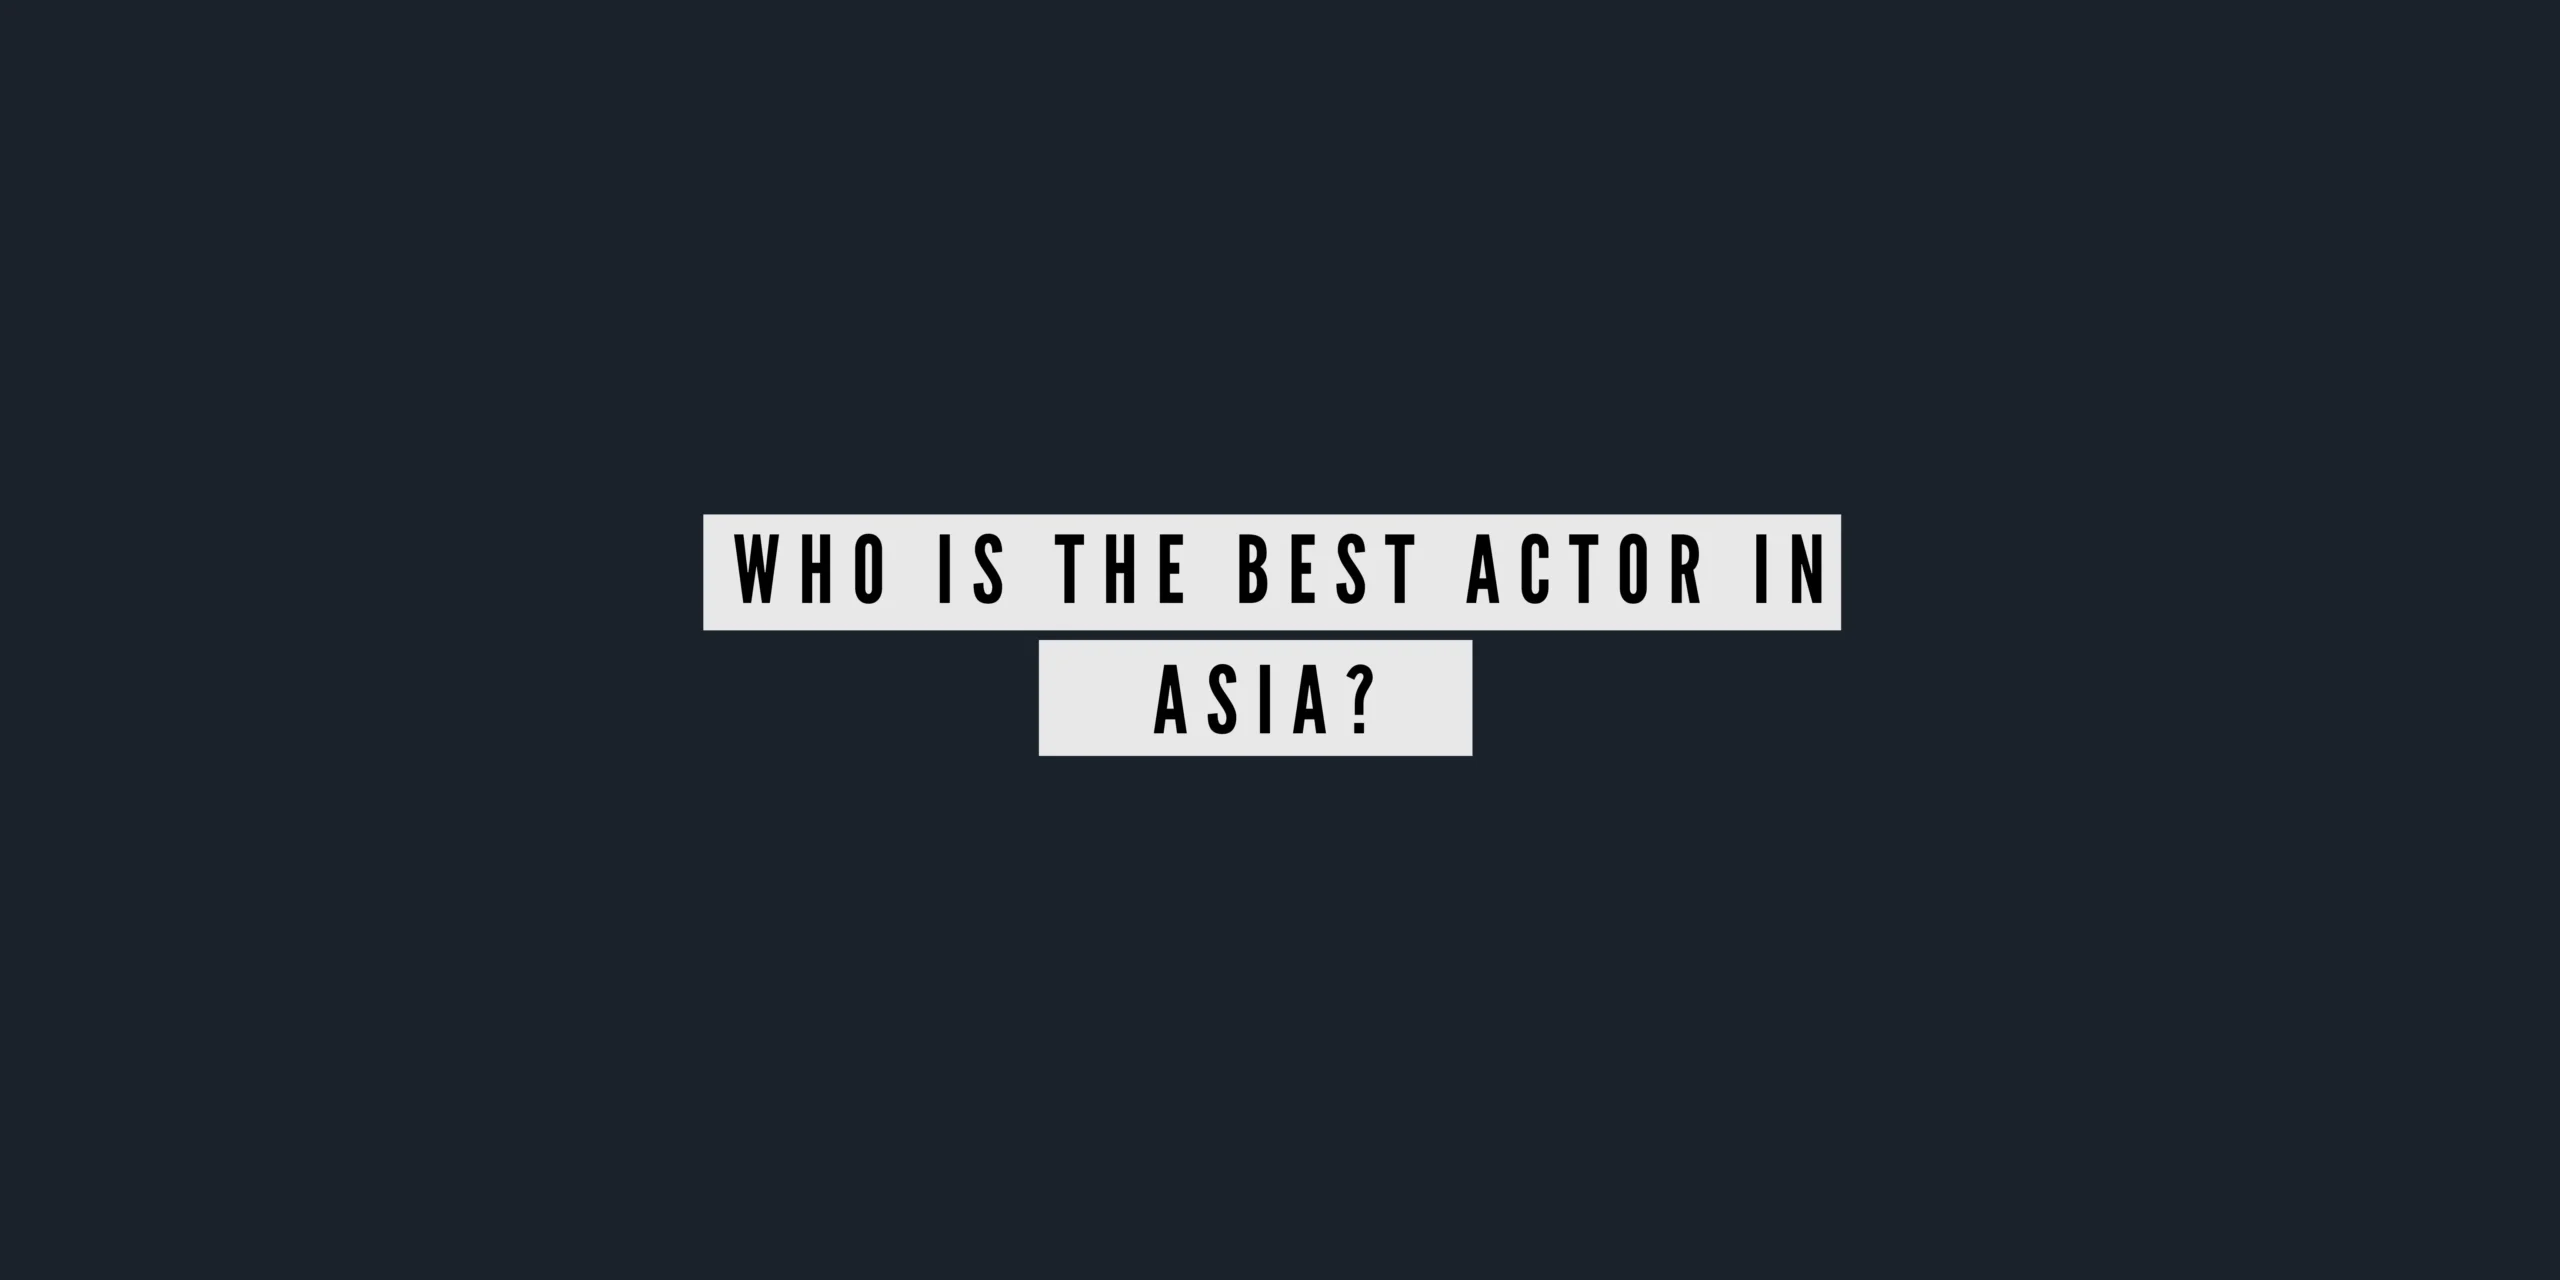 Who is the best actor in Asia